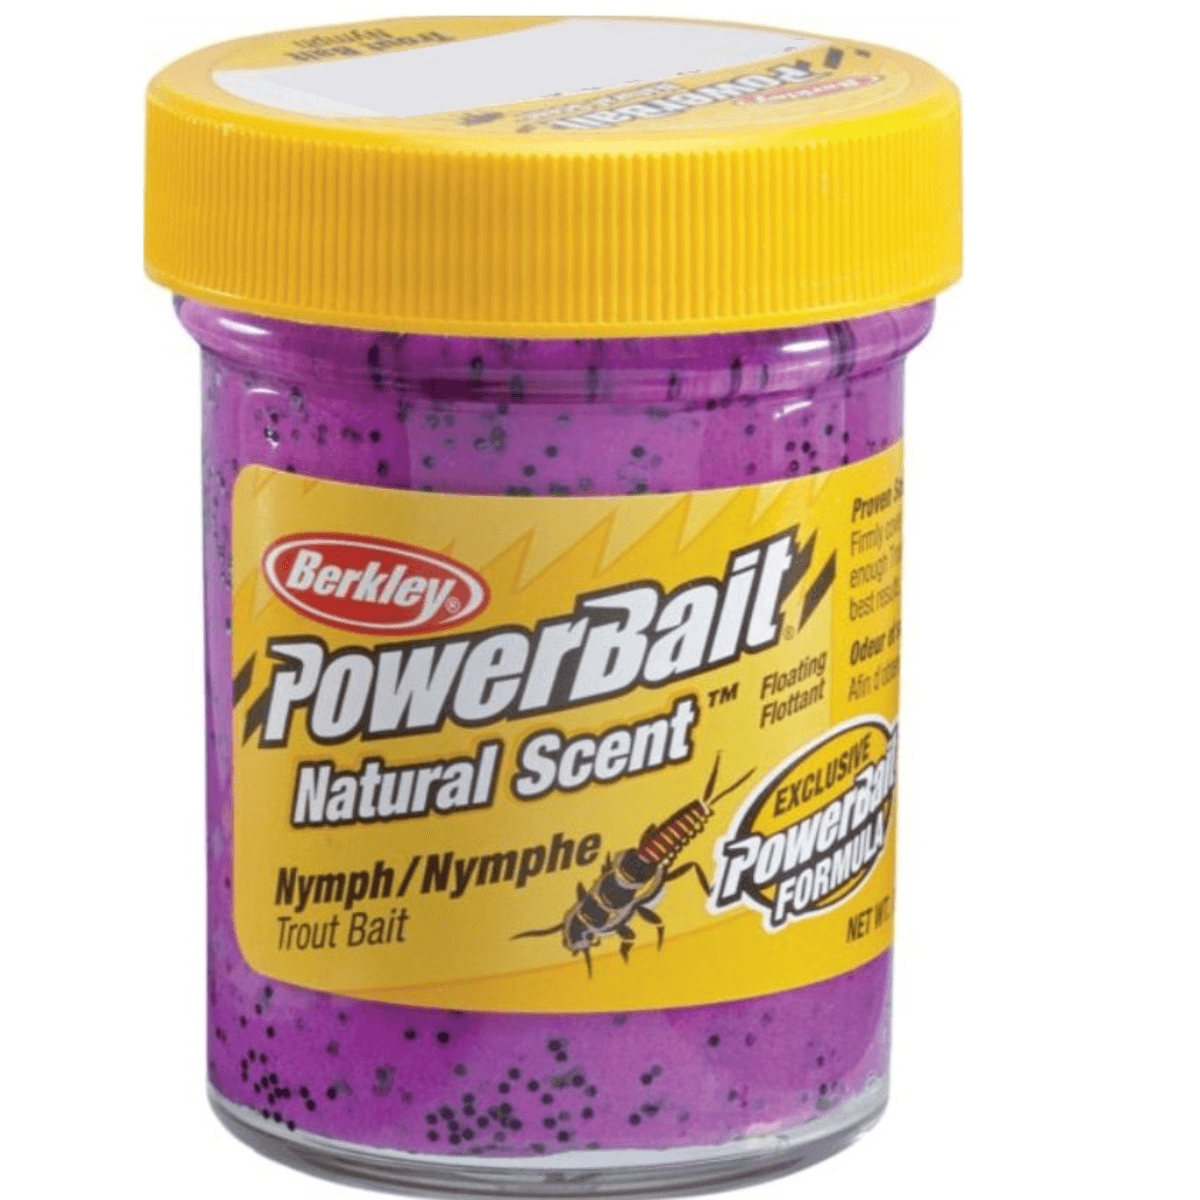 Berkley PowerBait Natural Scent Glitter Trout Bait -CHEESE/FROMAGE